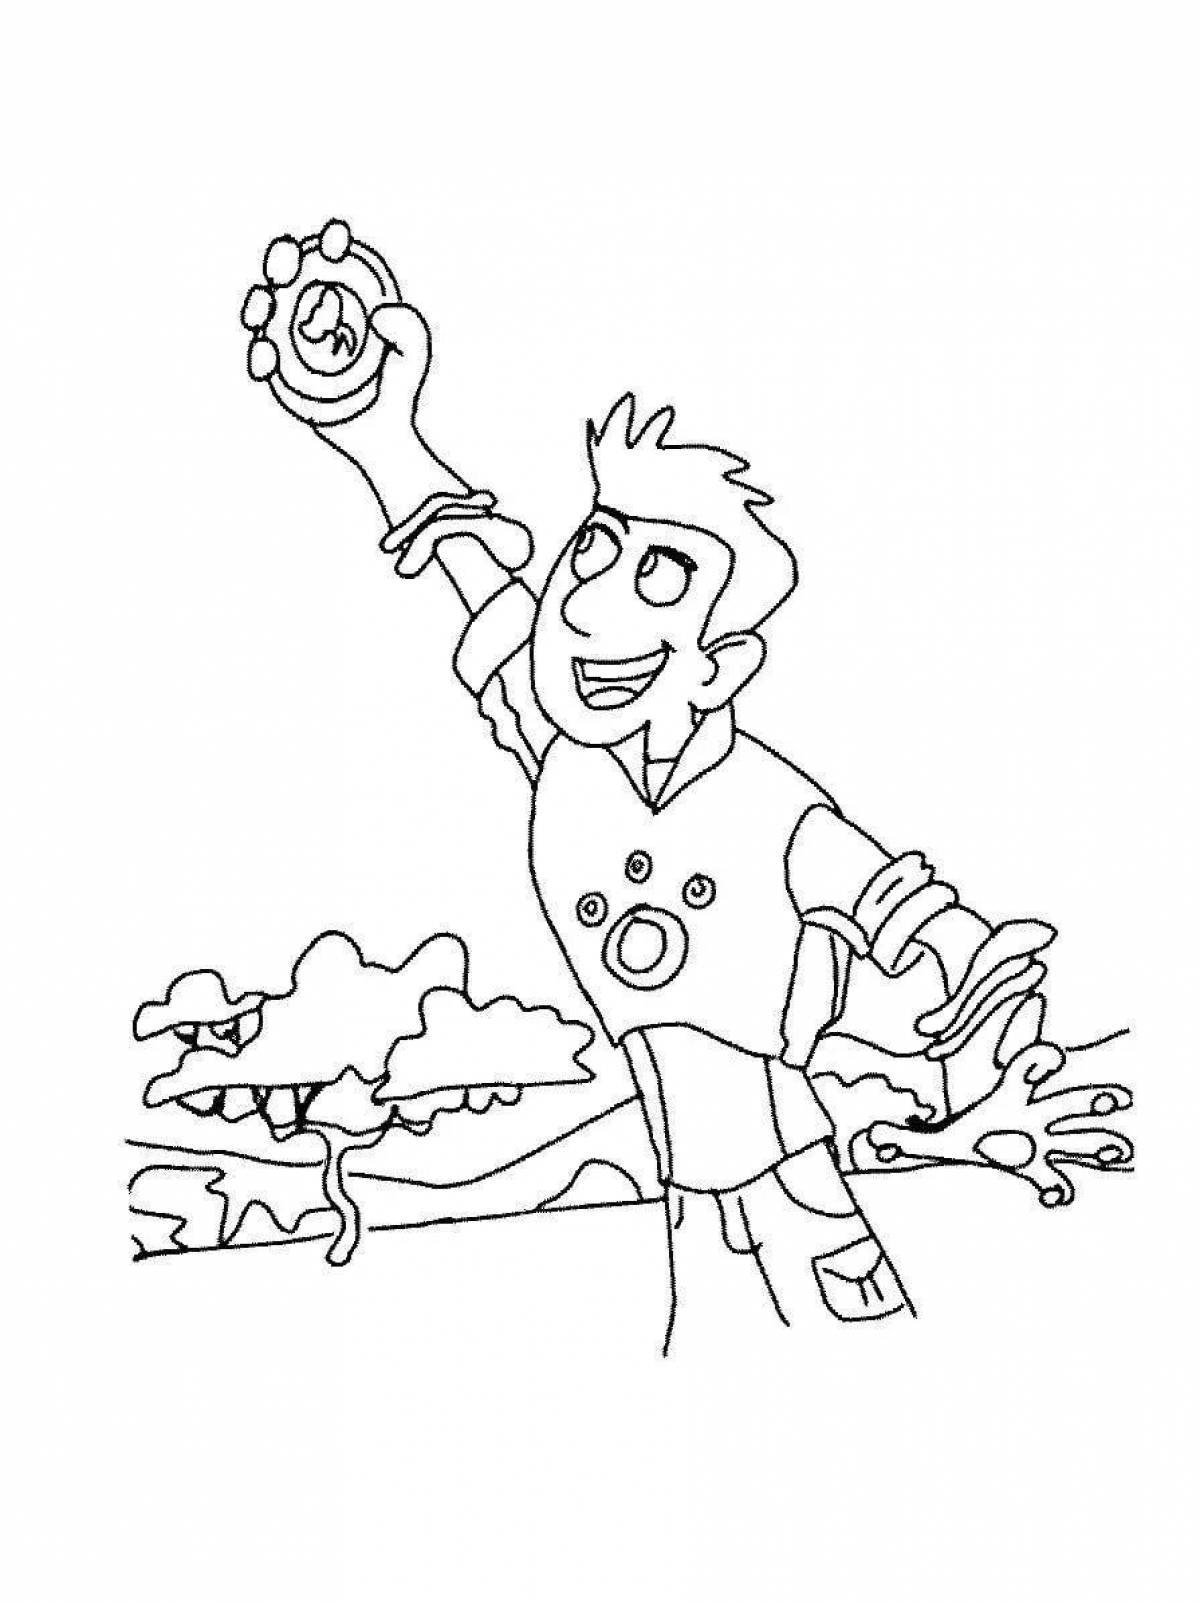 The kratt brothers' exciting coloring book design